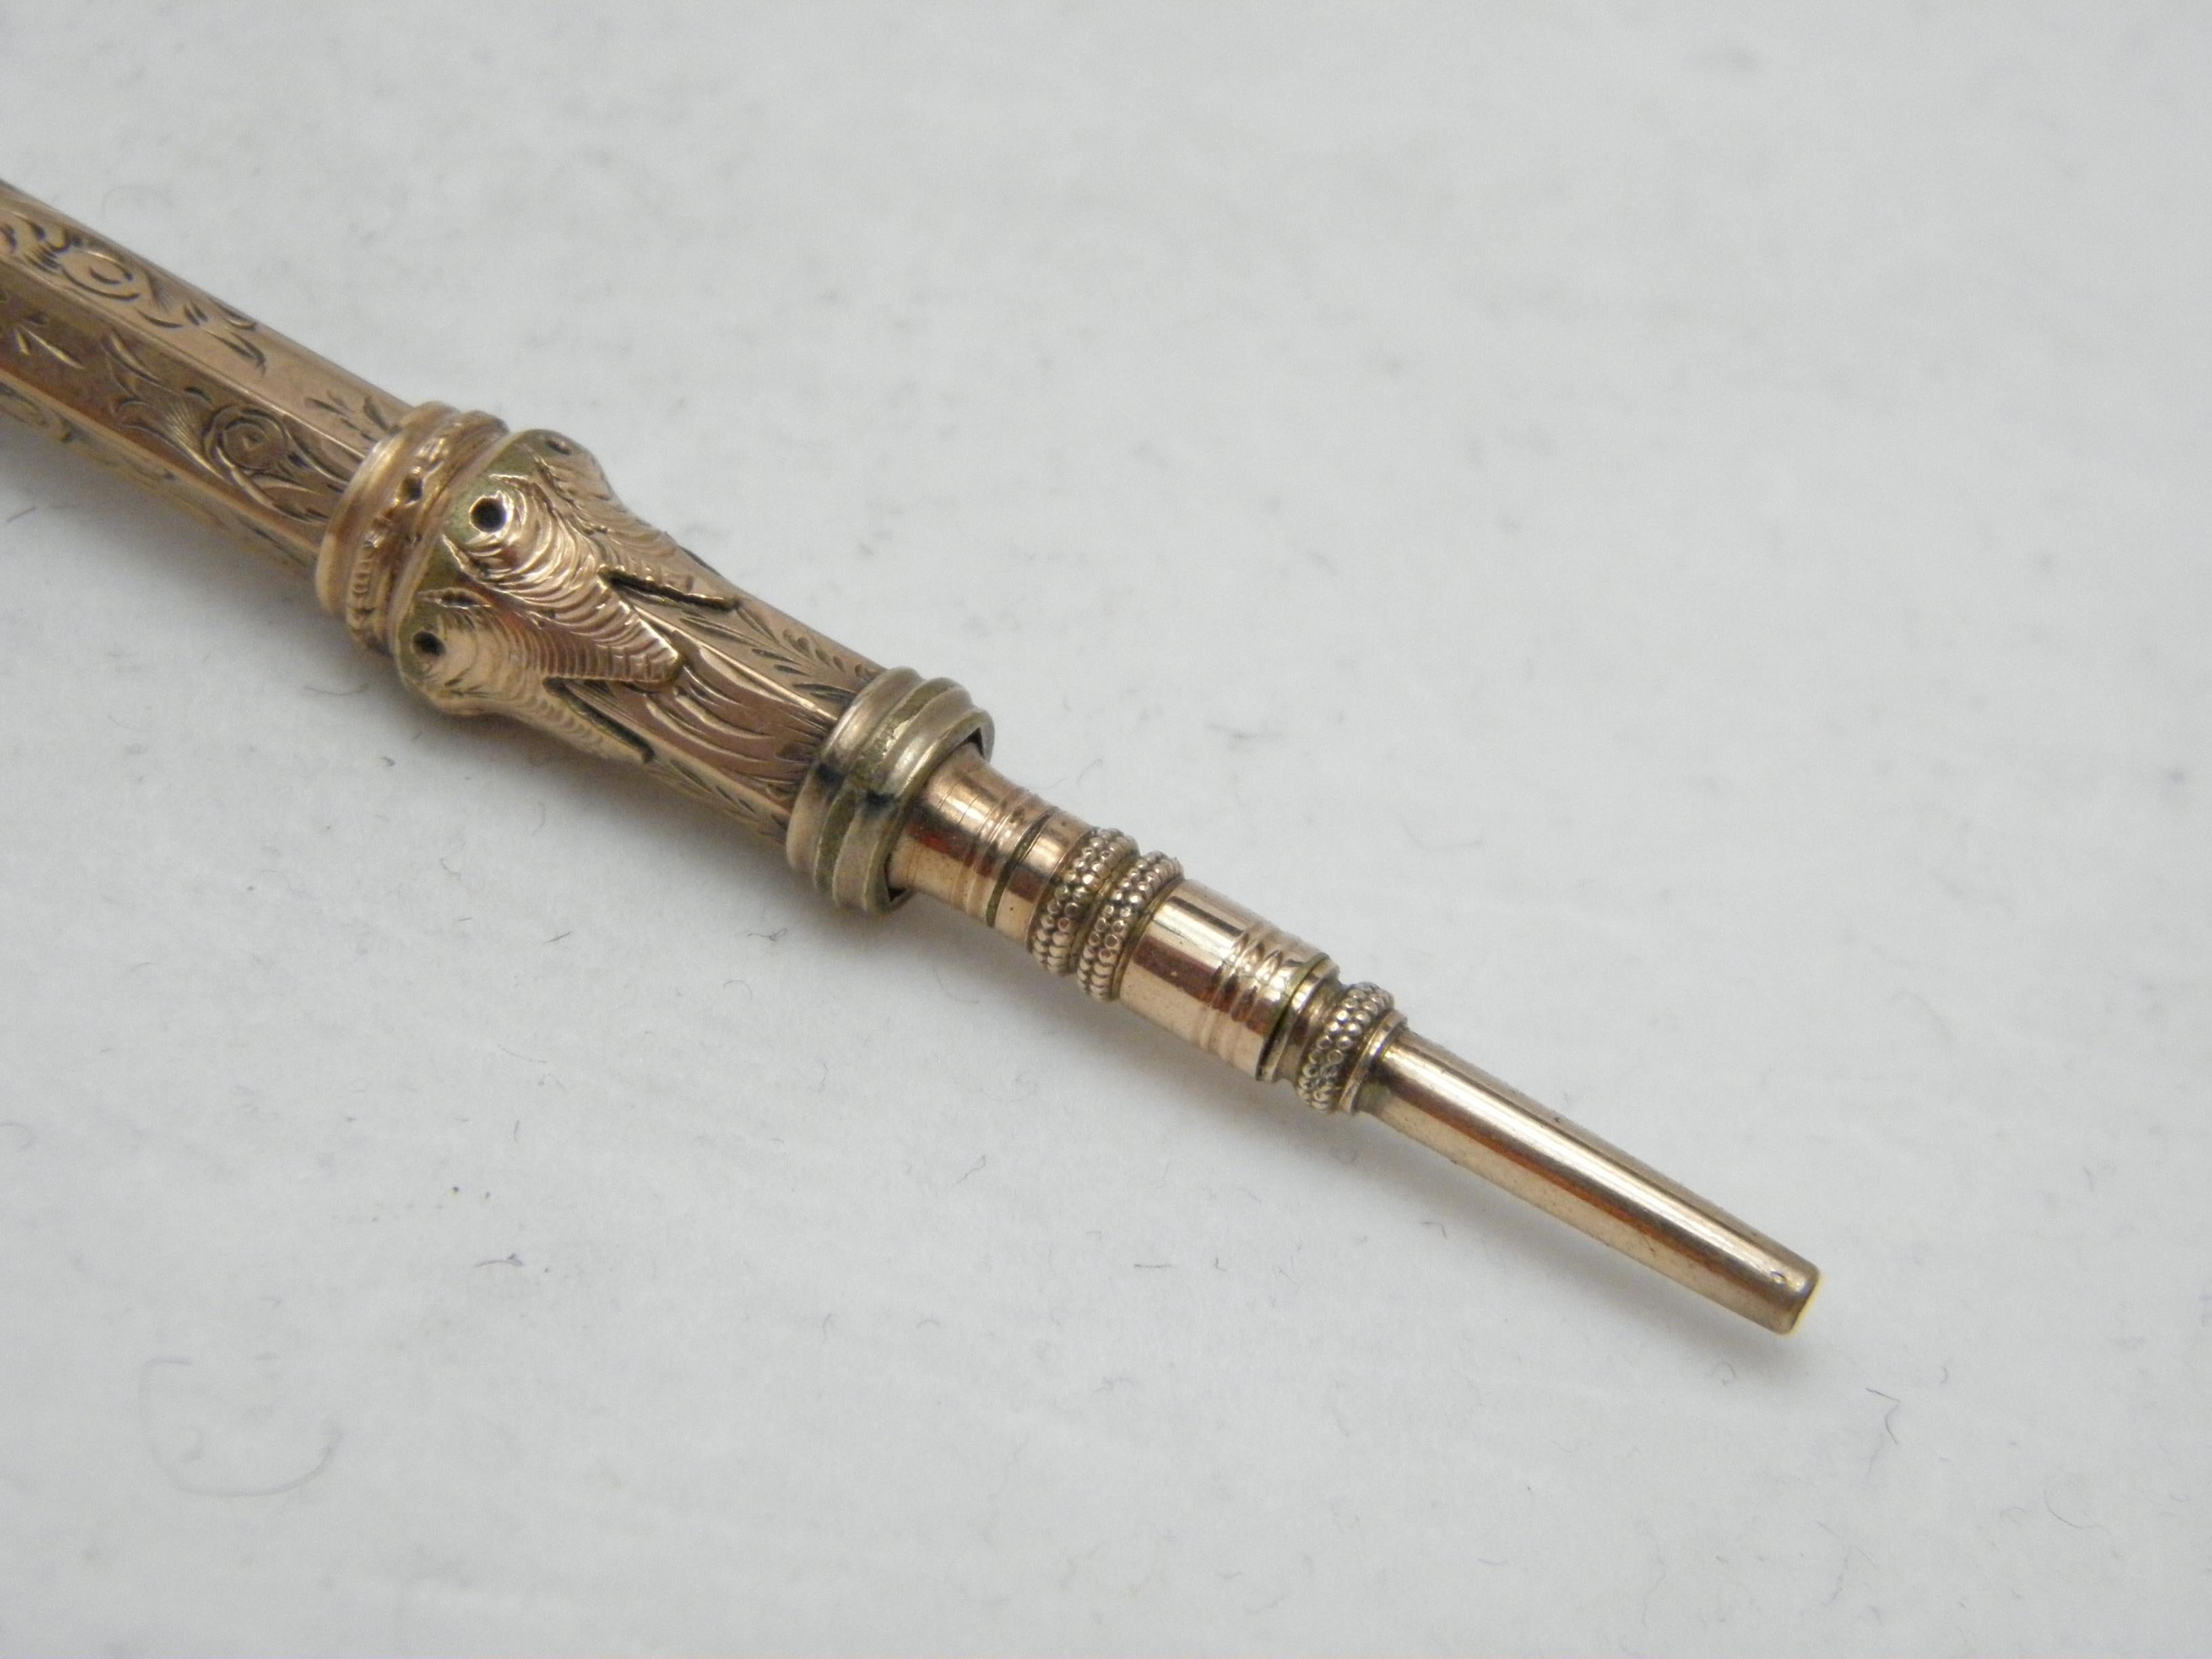 Bargain Antique 9ct Rose Gold Propelling Pencil 1860 375 Purity Huge Heavy 14.4g For Sale 1